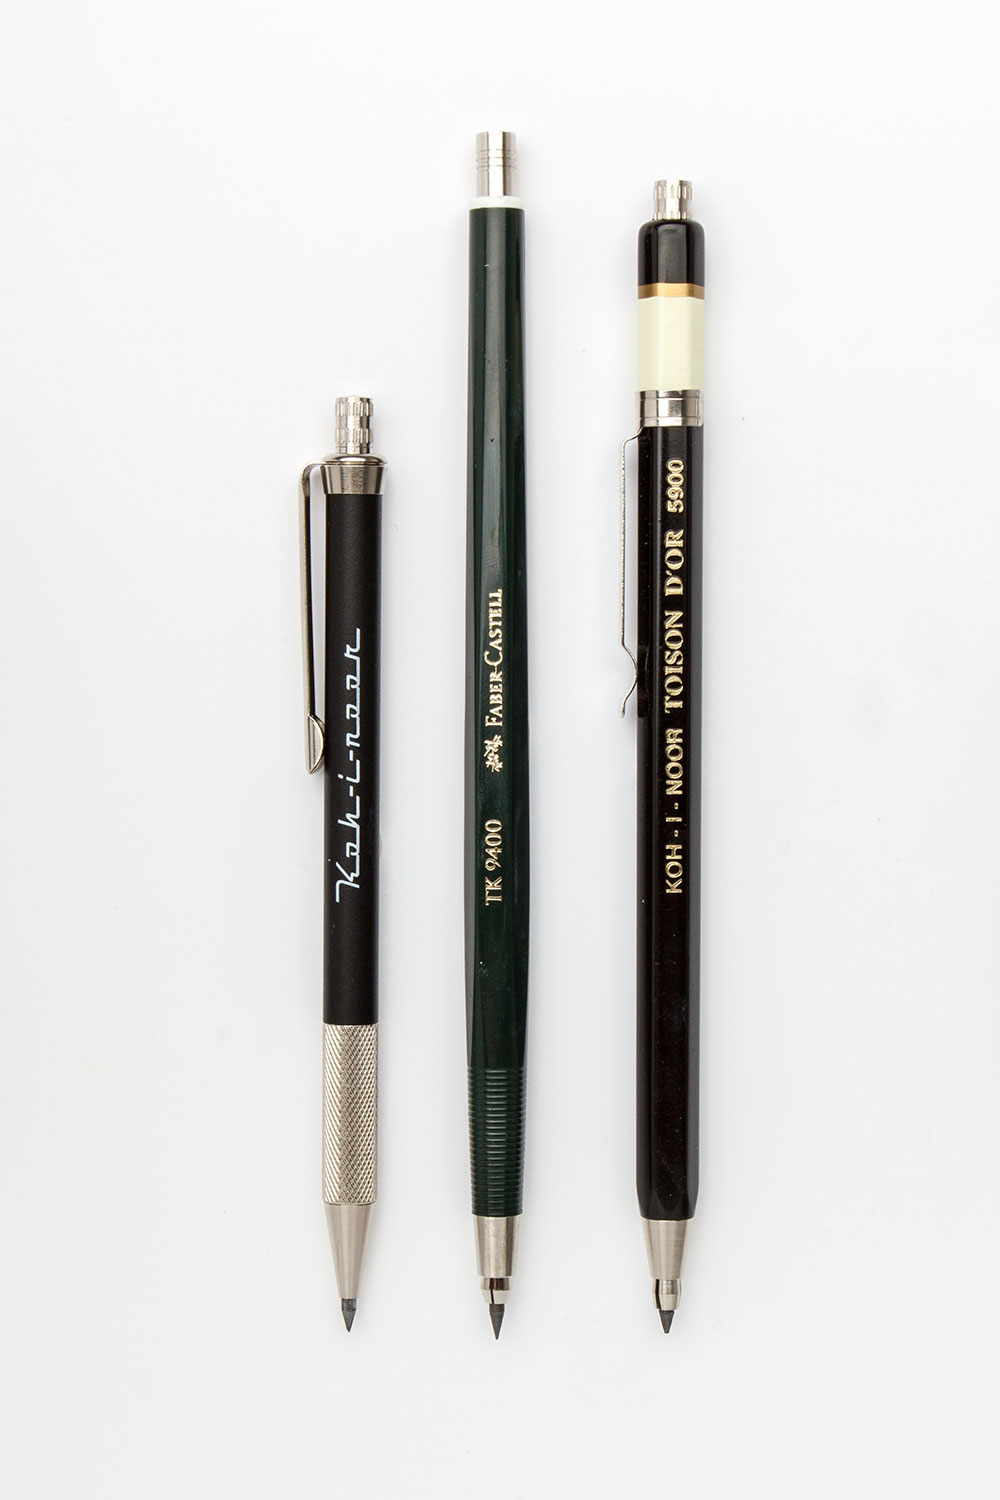 TK Clutch Pencil Leads 2mm Faber-Castell 2B tube of 10 leads 